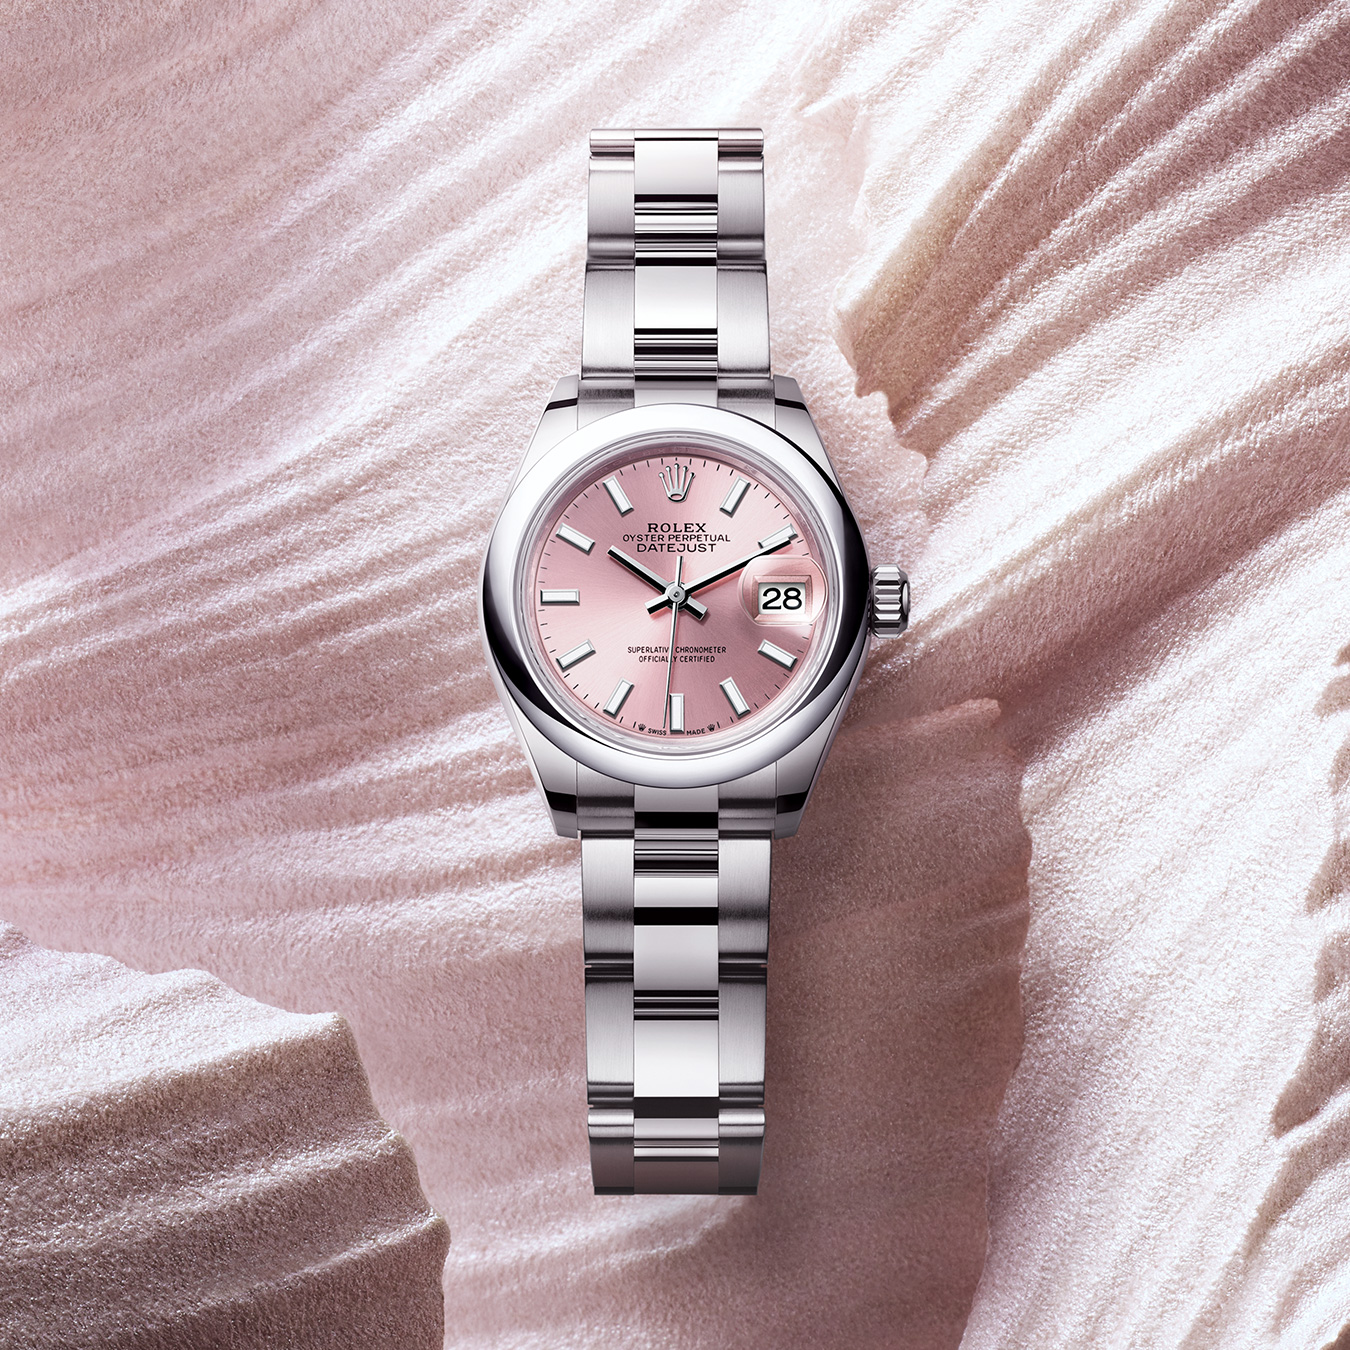 Rolex Lady-Datejust in stainless steel with pink dial